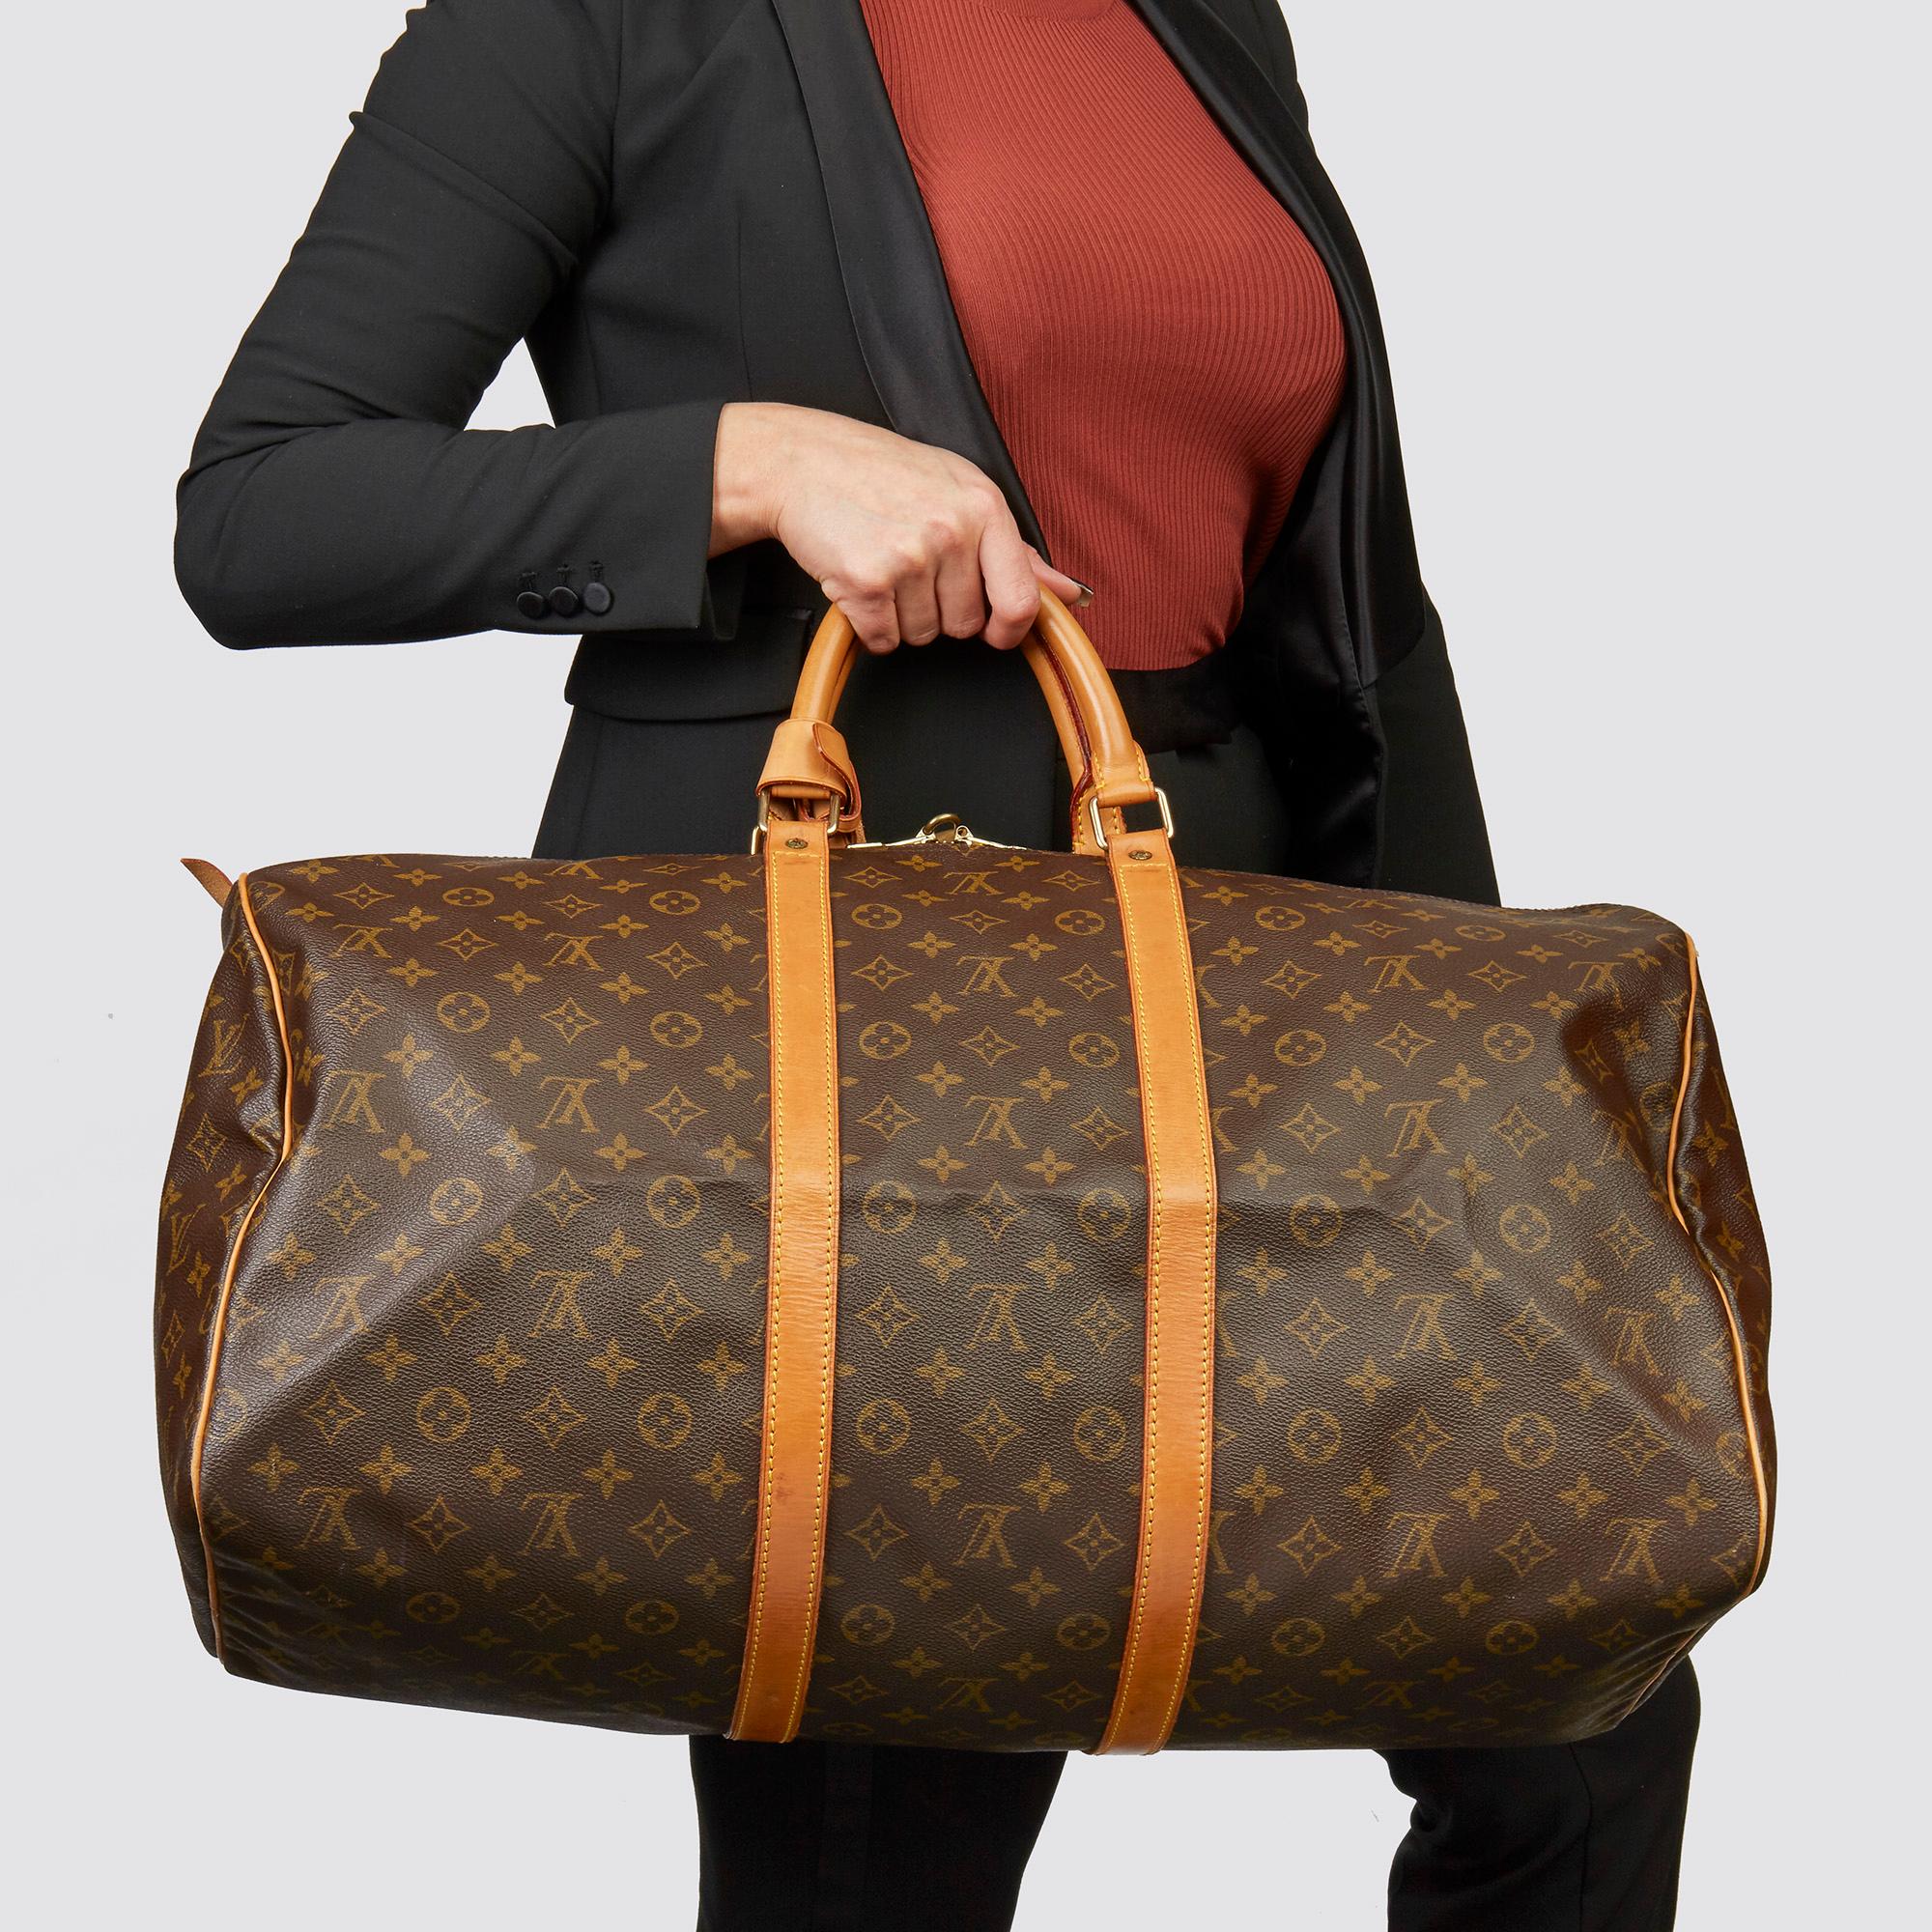 LOUIS VUITTON
Brown Monogram Coated Canvas & Vachetta Leather Vintage Keepall 55

Xupes Reference: HB3583
Serial Number: MI1901
Age (Circa): 1991
Authenticity Details: Date Stamp (Made in France) 
Gender: Unisex
Type: Travel

Colour: Brown
Hardware: